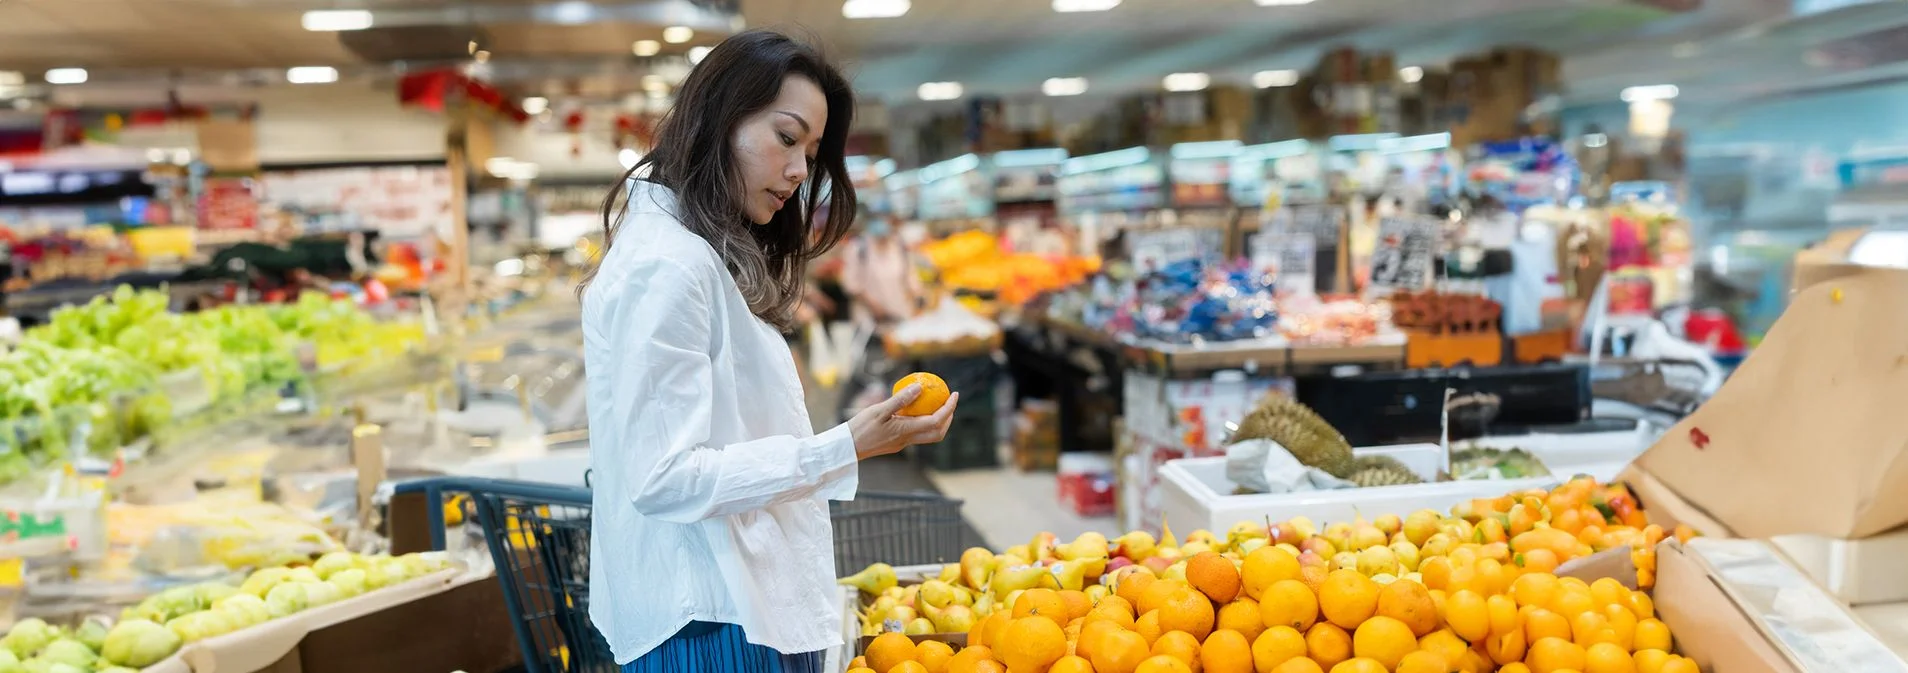 A woman looking at an orange in the produce section of a grocery store